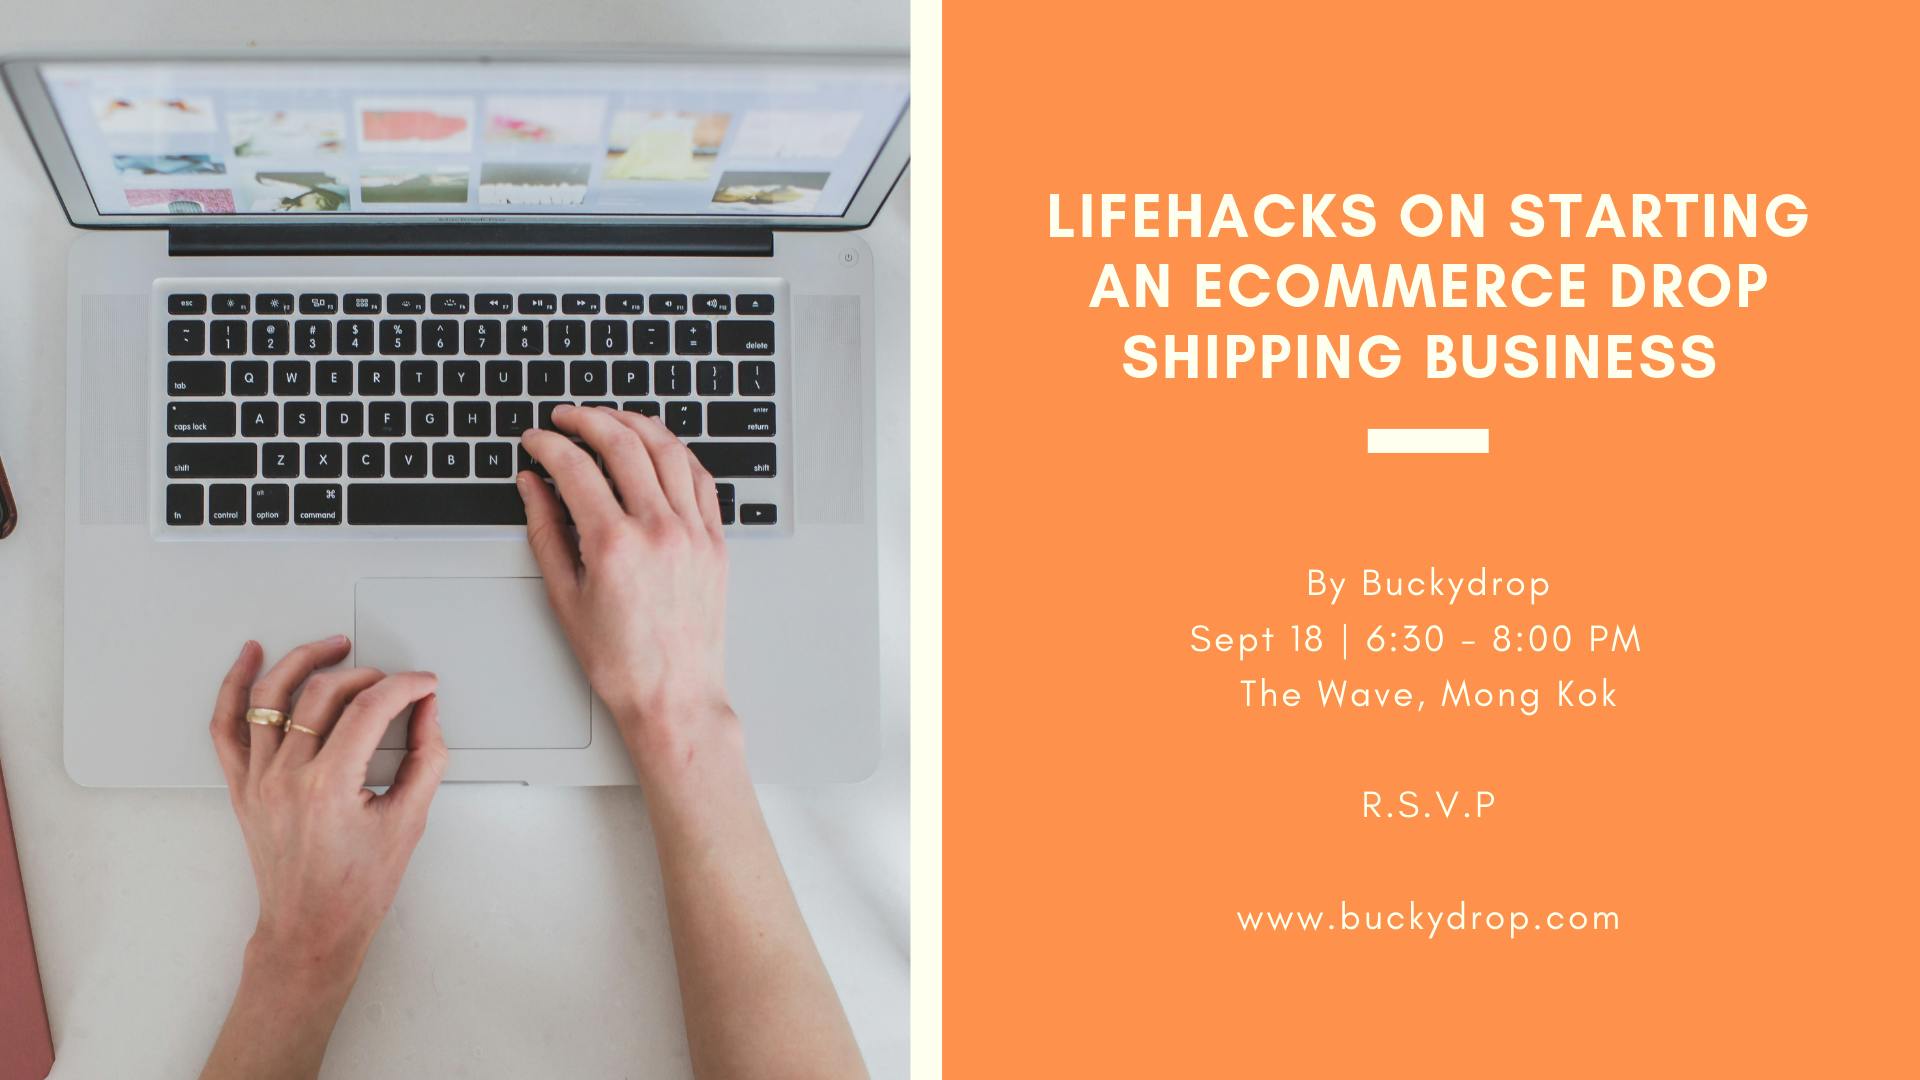 Life Hacks on Starting an E-commerce Drop Shipping Business